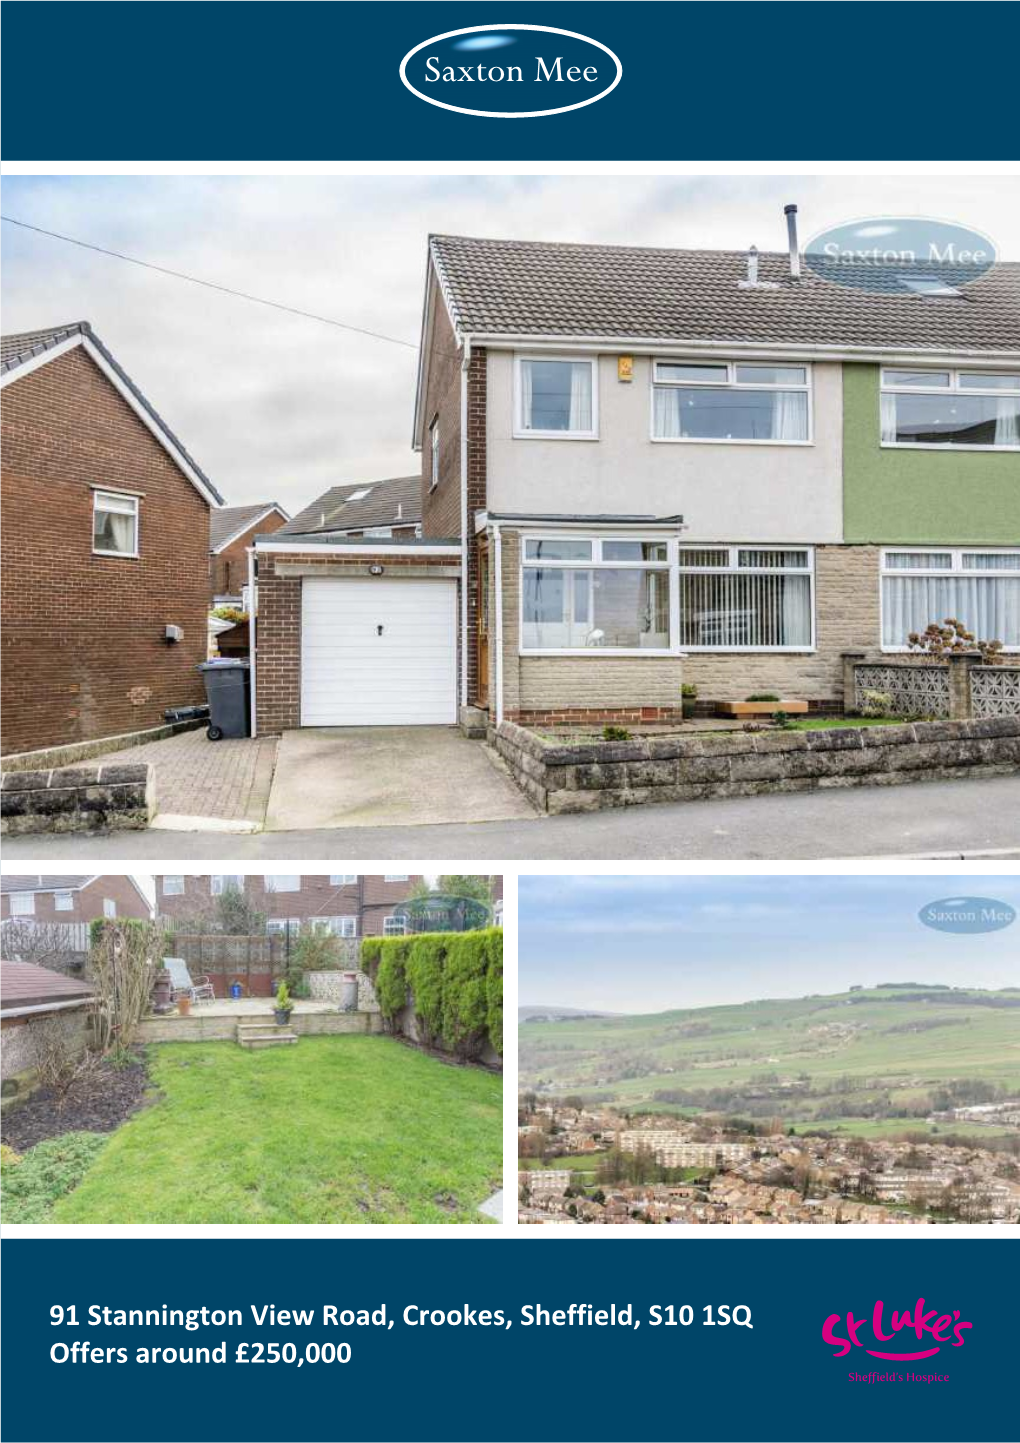 91 Stannington View Road, Crookes, Sheffield, S10 1SQ Offers Around £250,000 She Ield’S Hospice 91 Stannington View Road Crookes Offers Around £250,000